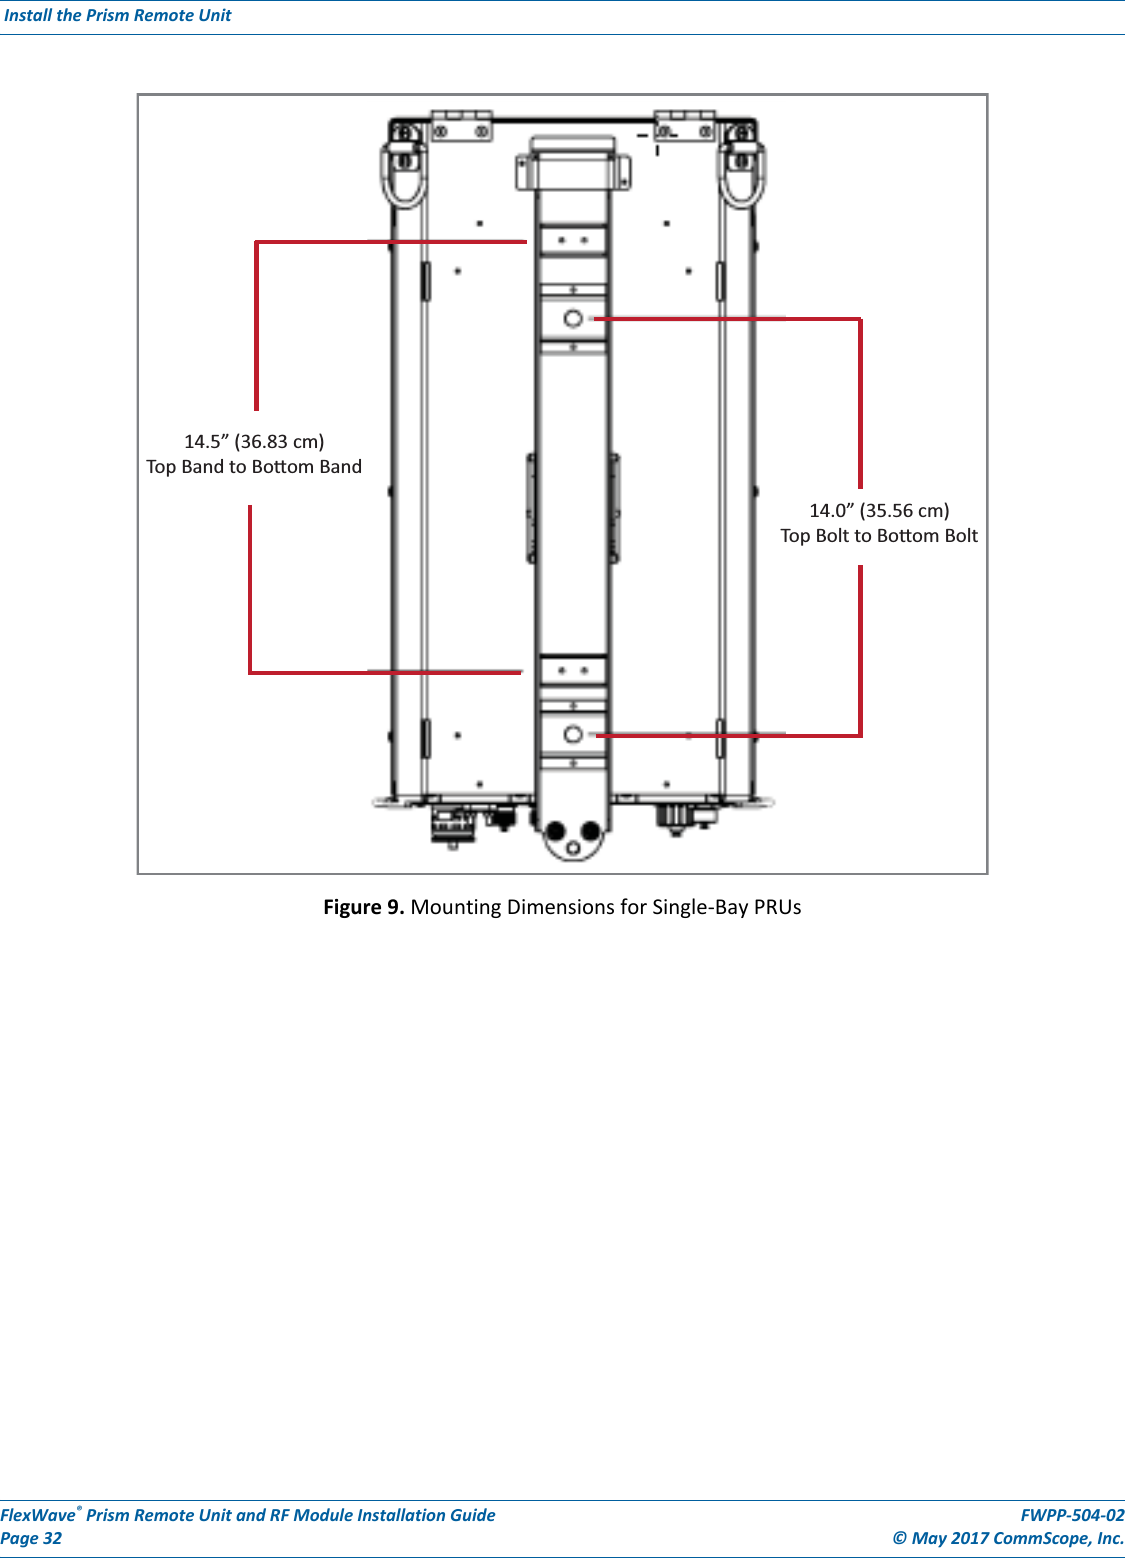 FlexWave® Prism Remote Unit and RF Module Installation Guide FWPP-504-02Page 32 © May 2017 CommScope, Inc. Install the Prism Remote Unit  Figure 9. Mounting Dimensions for Single-Bay PRUs14.5” (36.83 cm)Top Band to Boom Band14.0” (35.56 cm)Top Bolt to Boom Bolt